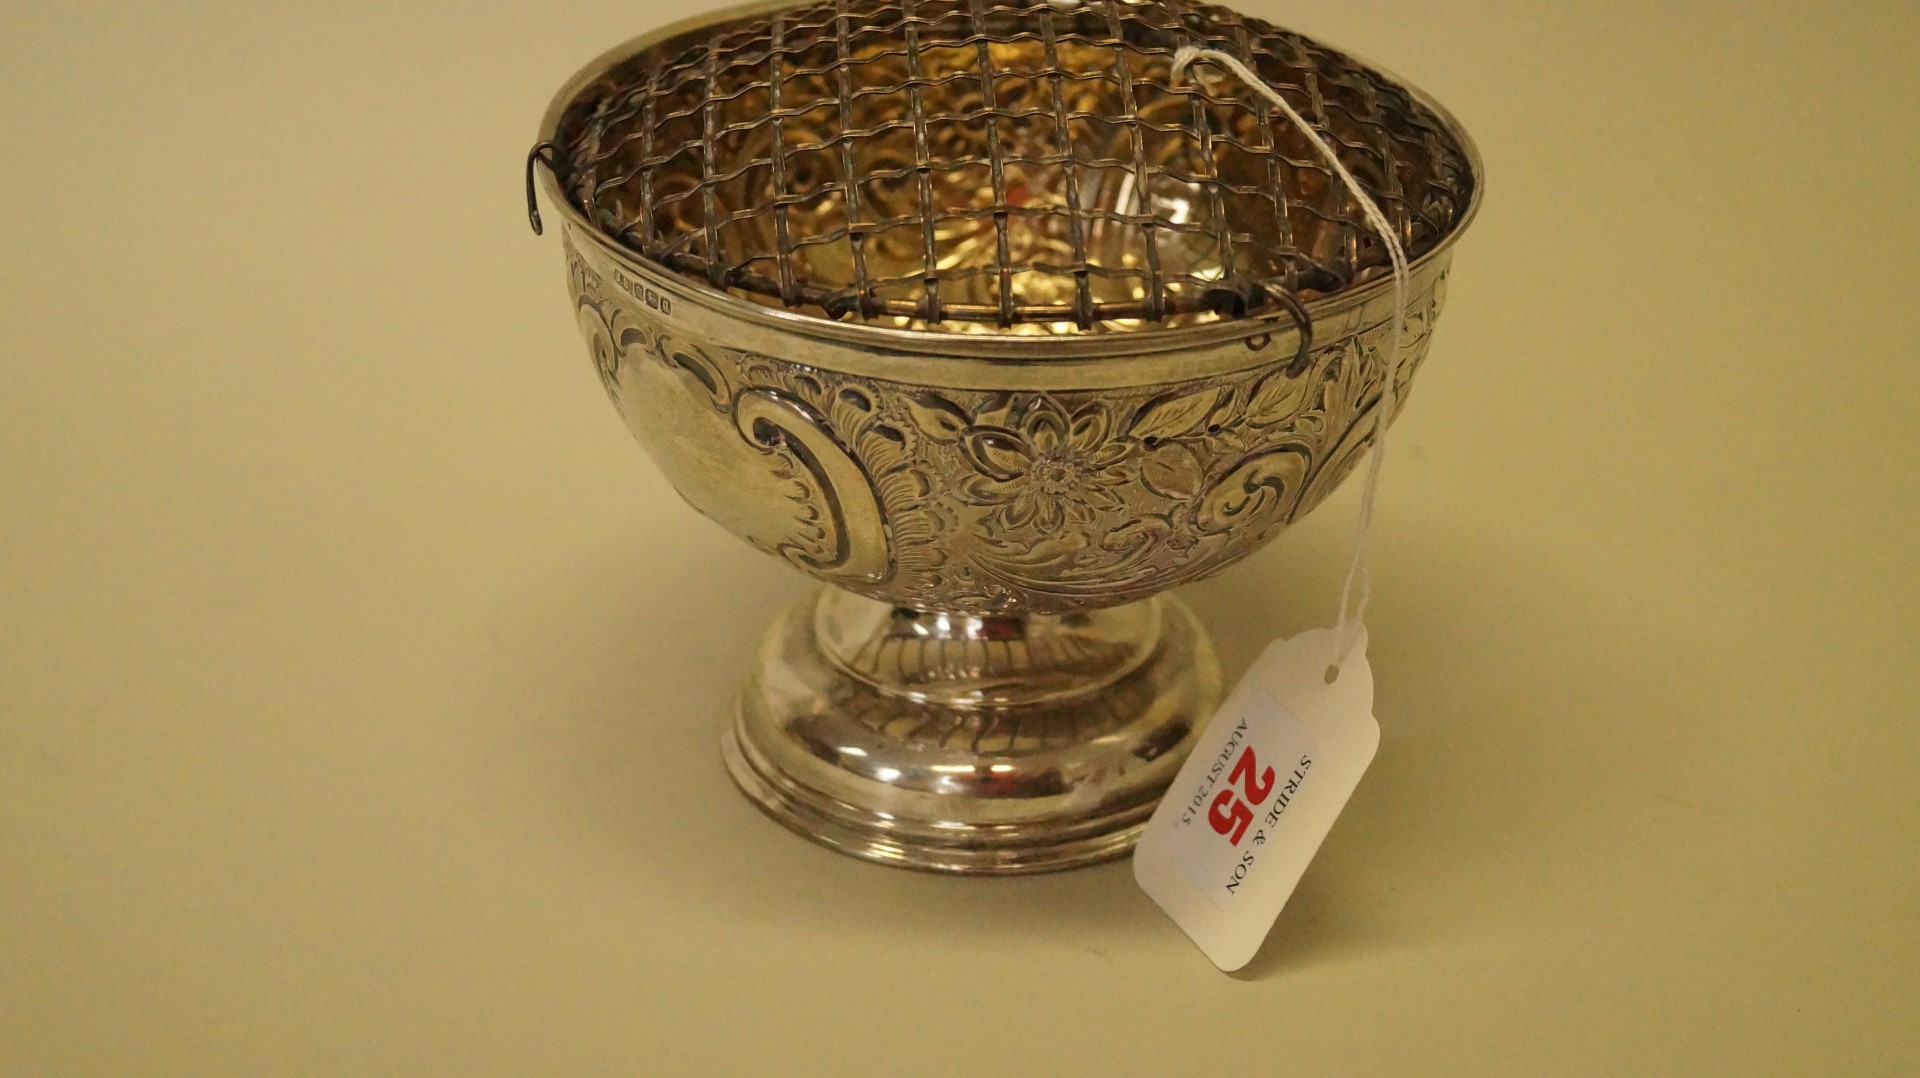 An Edwardian silver miniature footed rose bowl, by J.